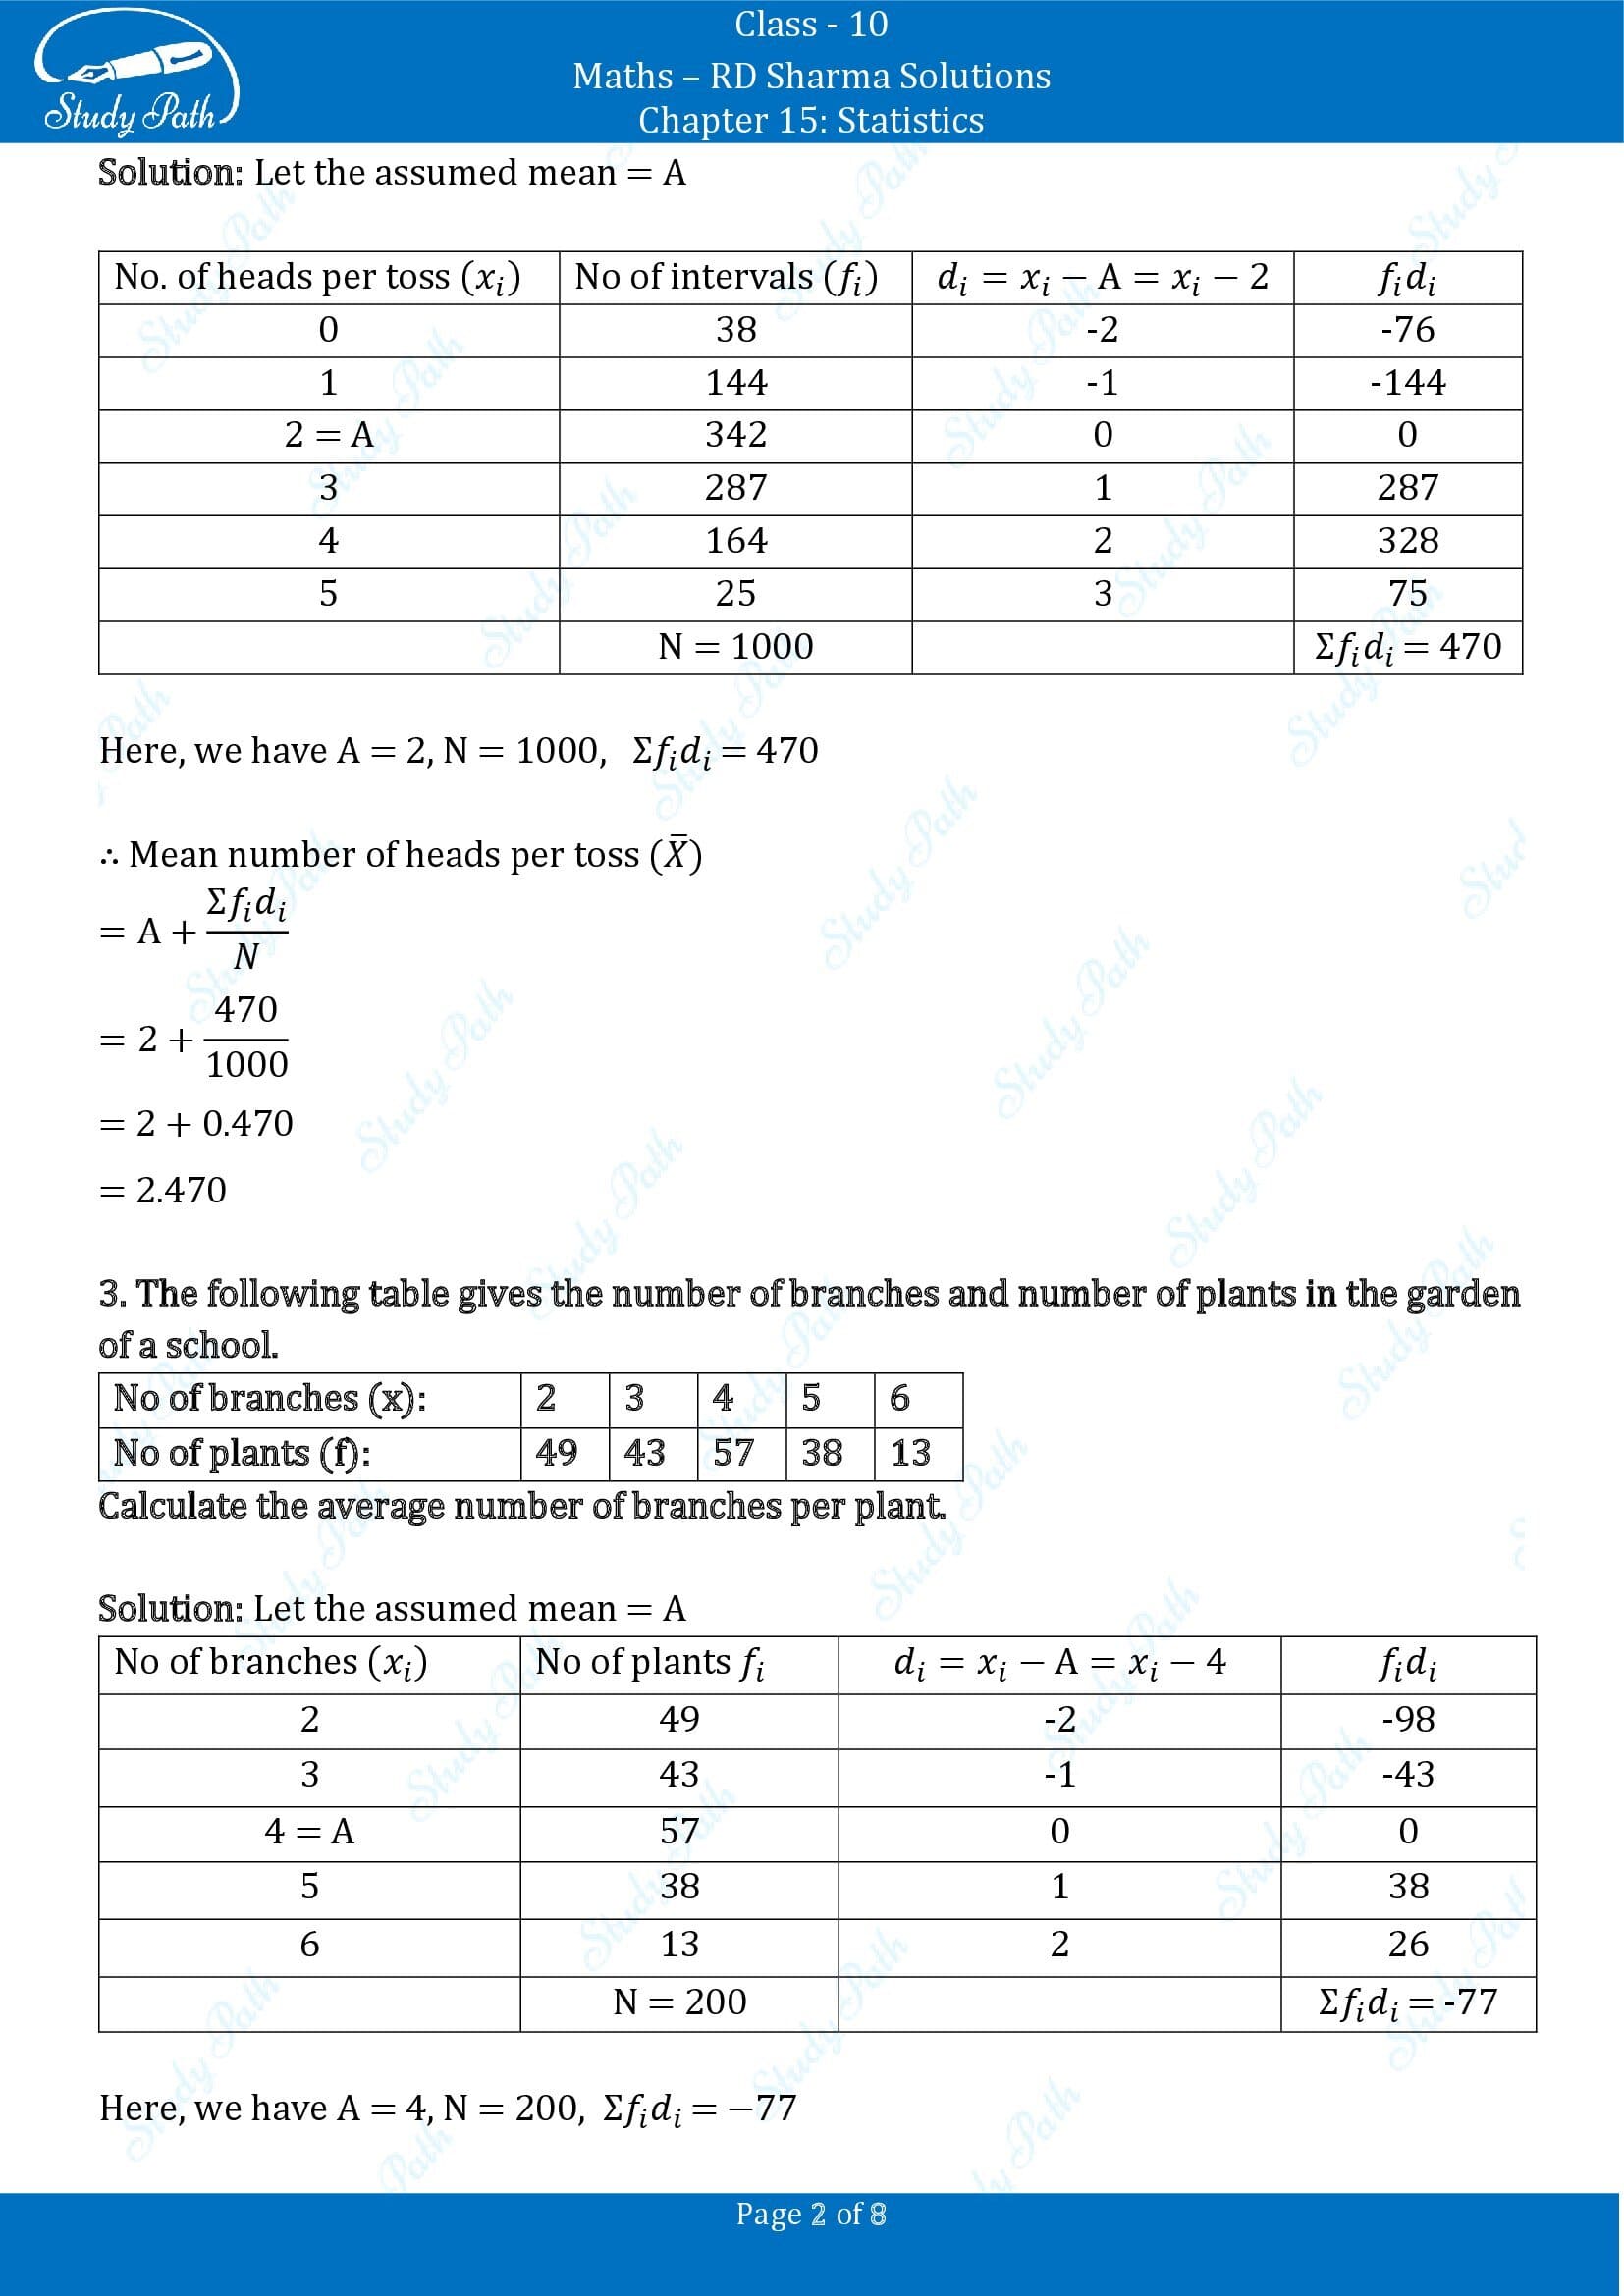 RD Sharma Solutions Class 10 Chapter 15 Statistics Exercise 15.2 00002